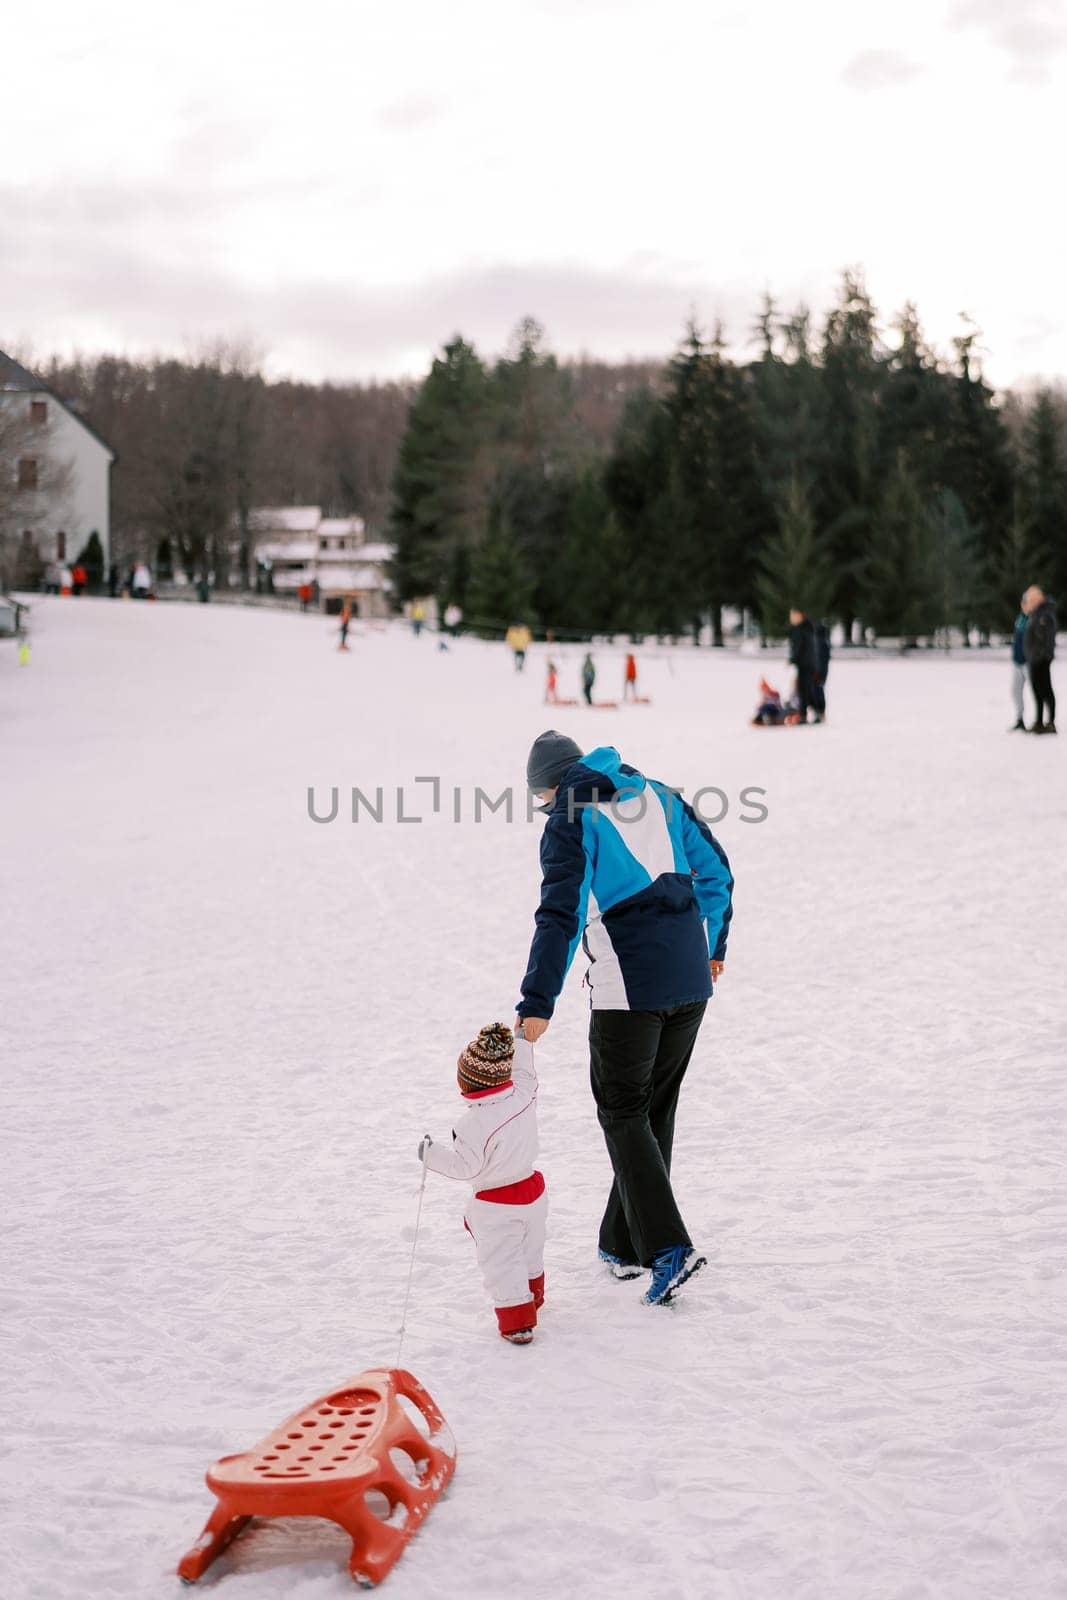 Dad leads by the hand a small child pulling a sled across a snowy plain. Back view. High quality photo